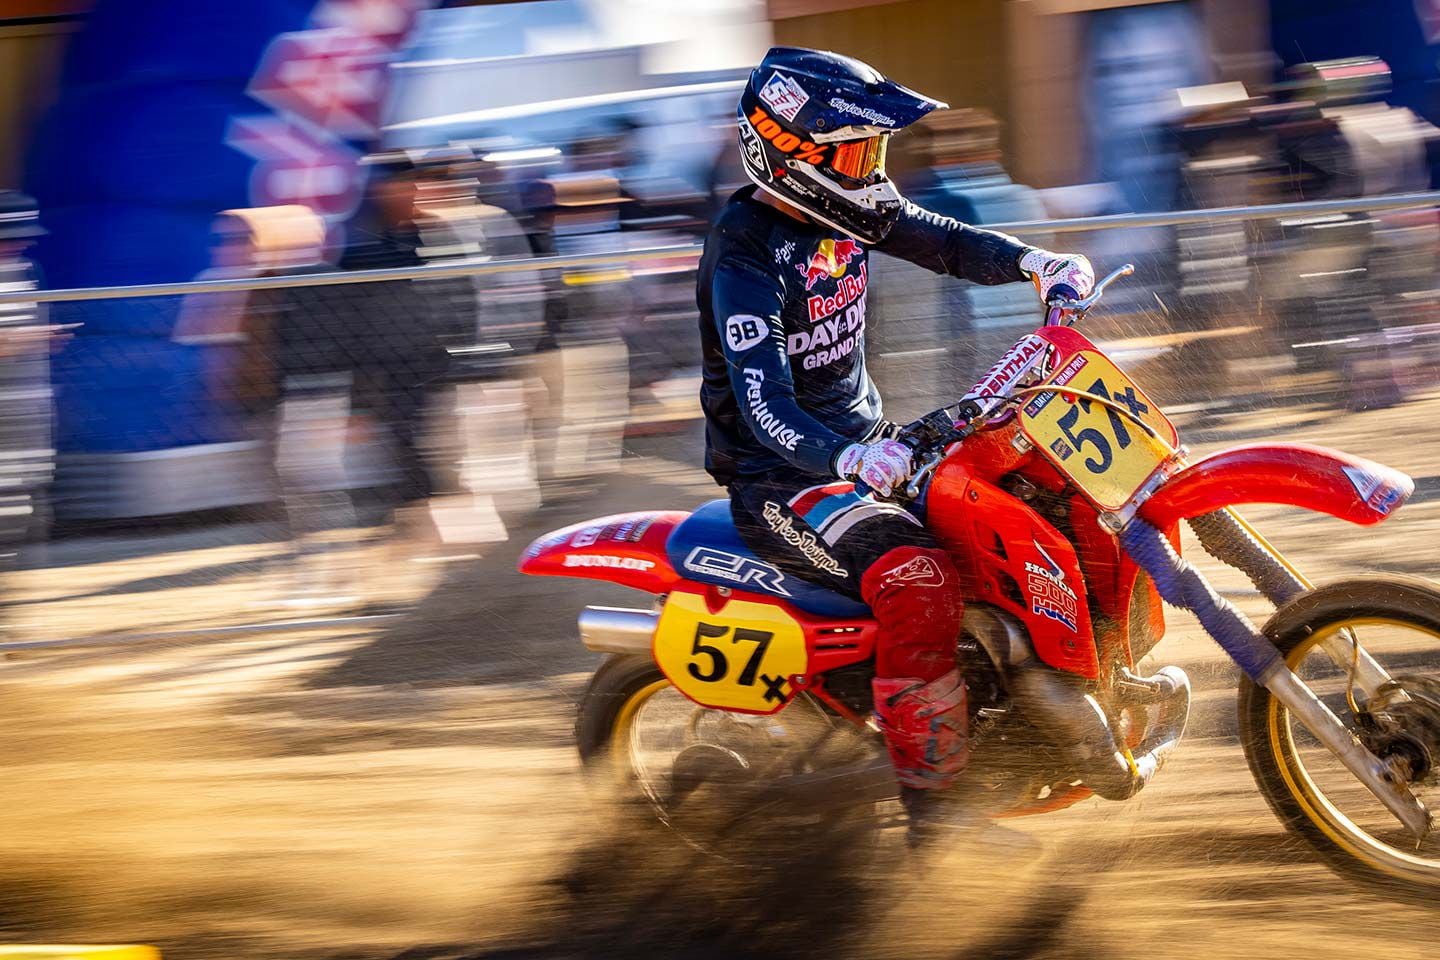 Good times and roost is what the annual Red Bull Day in the Dirt motocross grand prix is about.